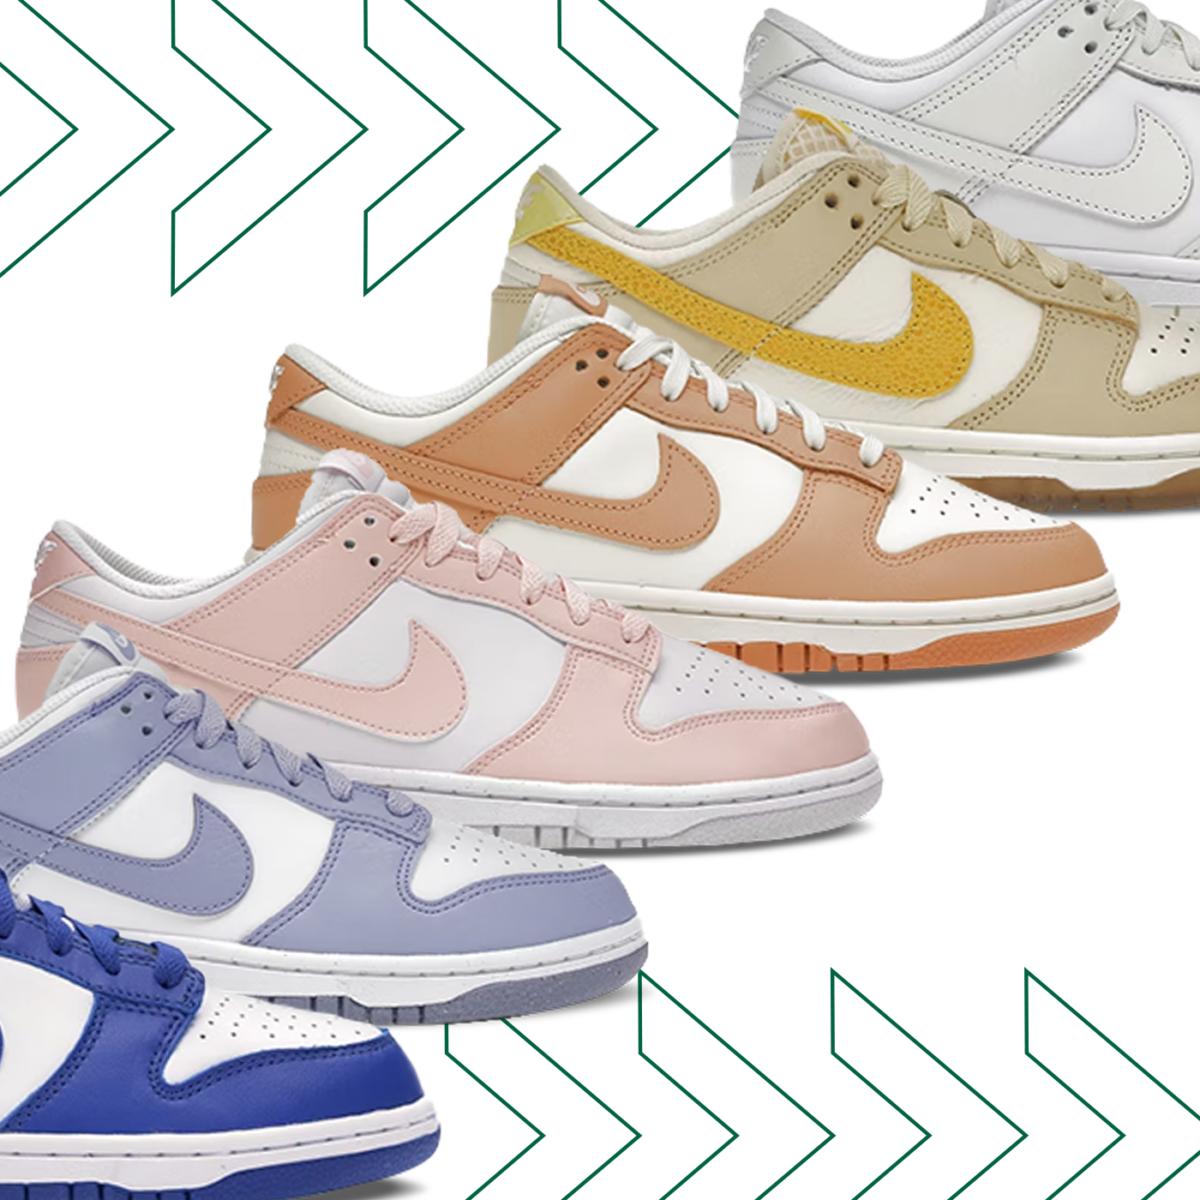 Check Out These Upcoming Nike Dunk High Colorways